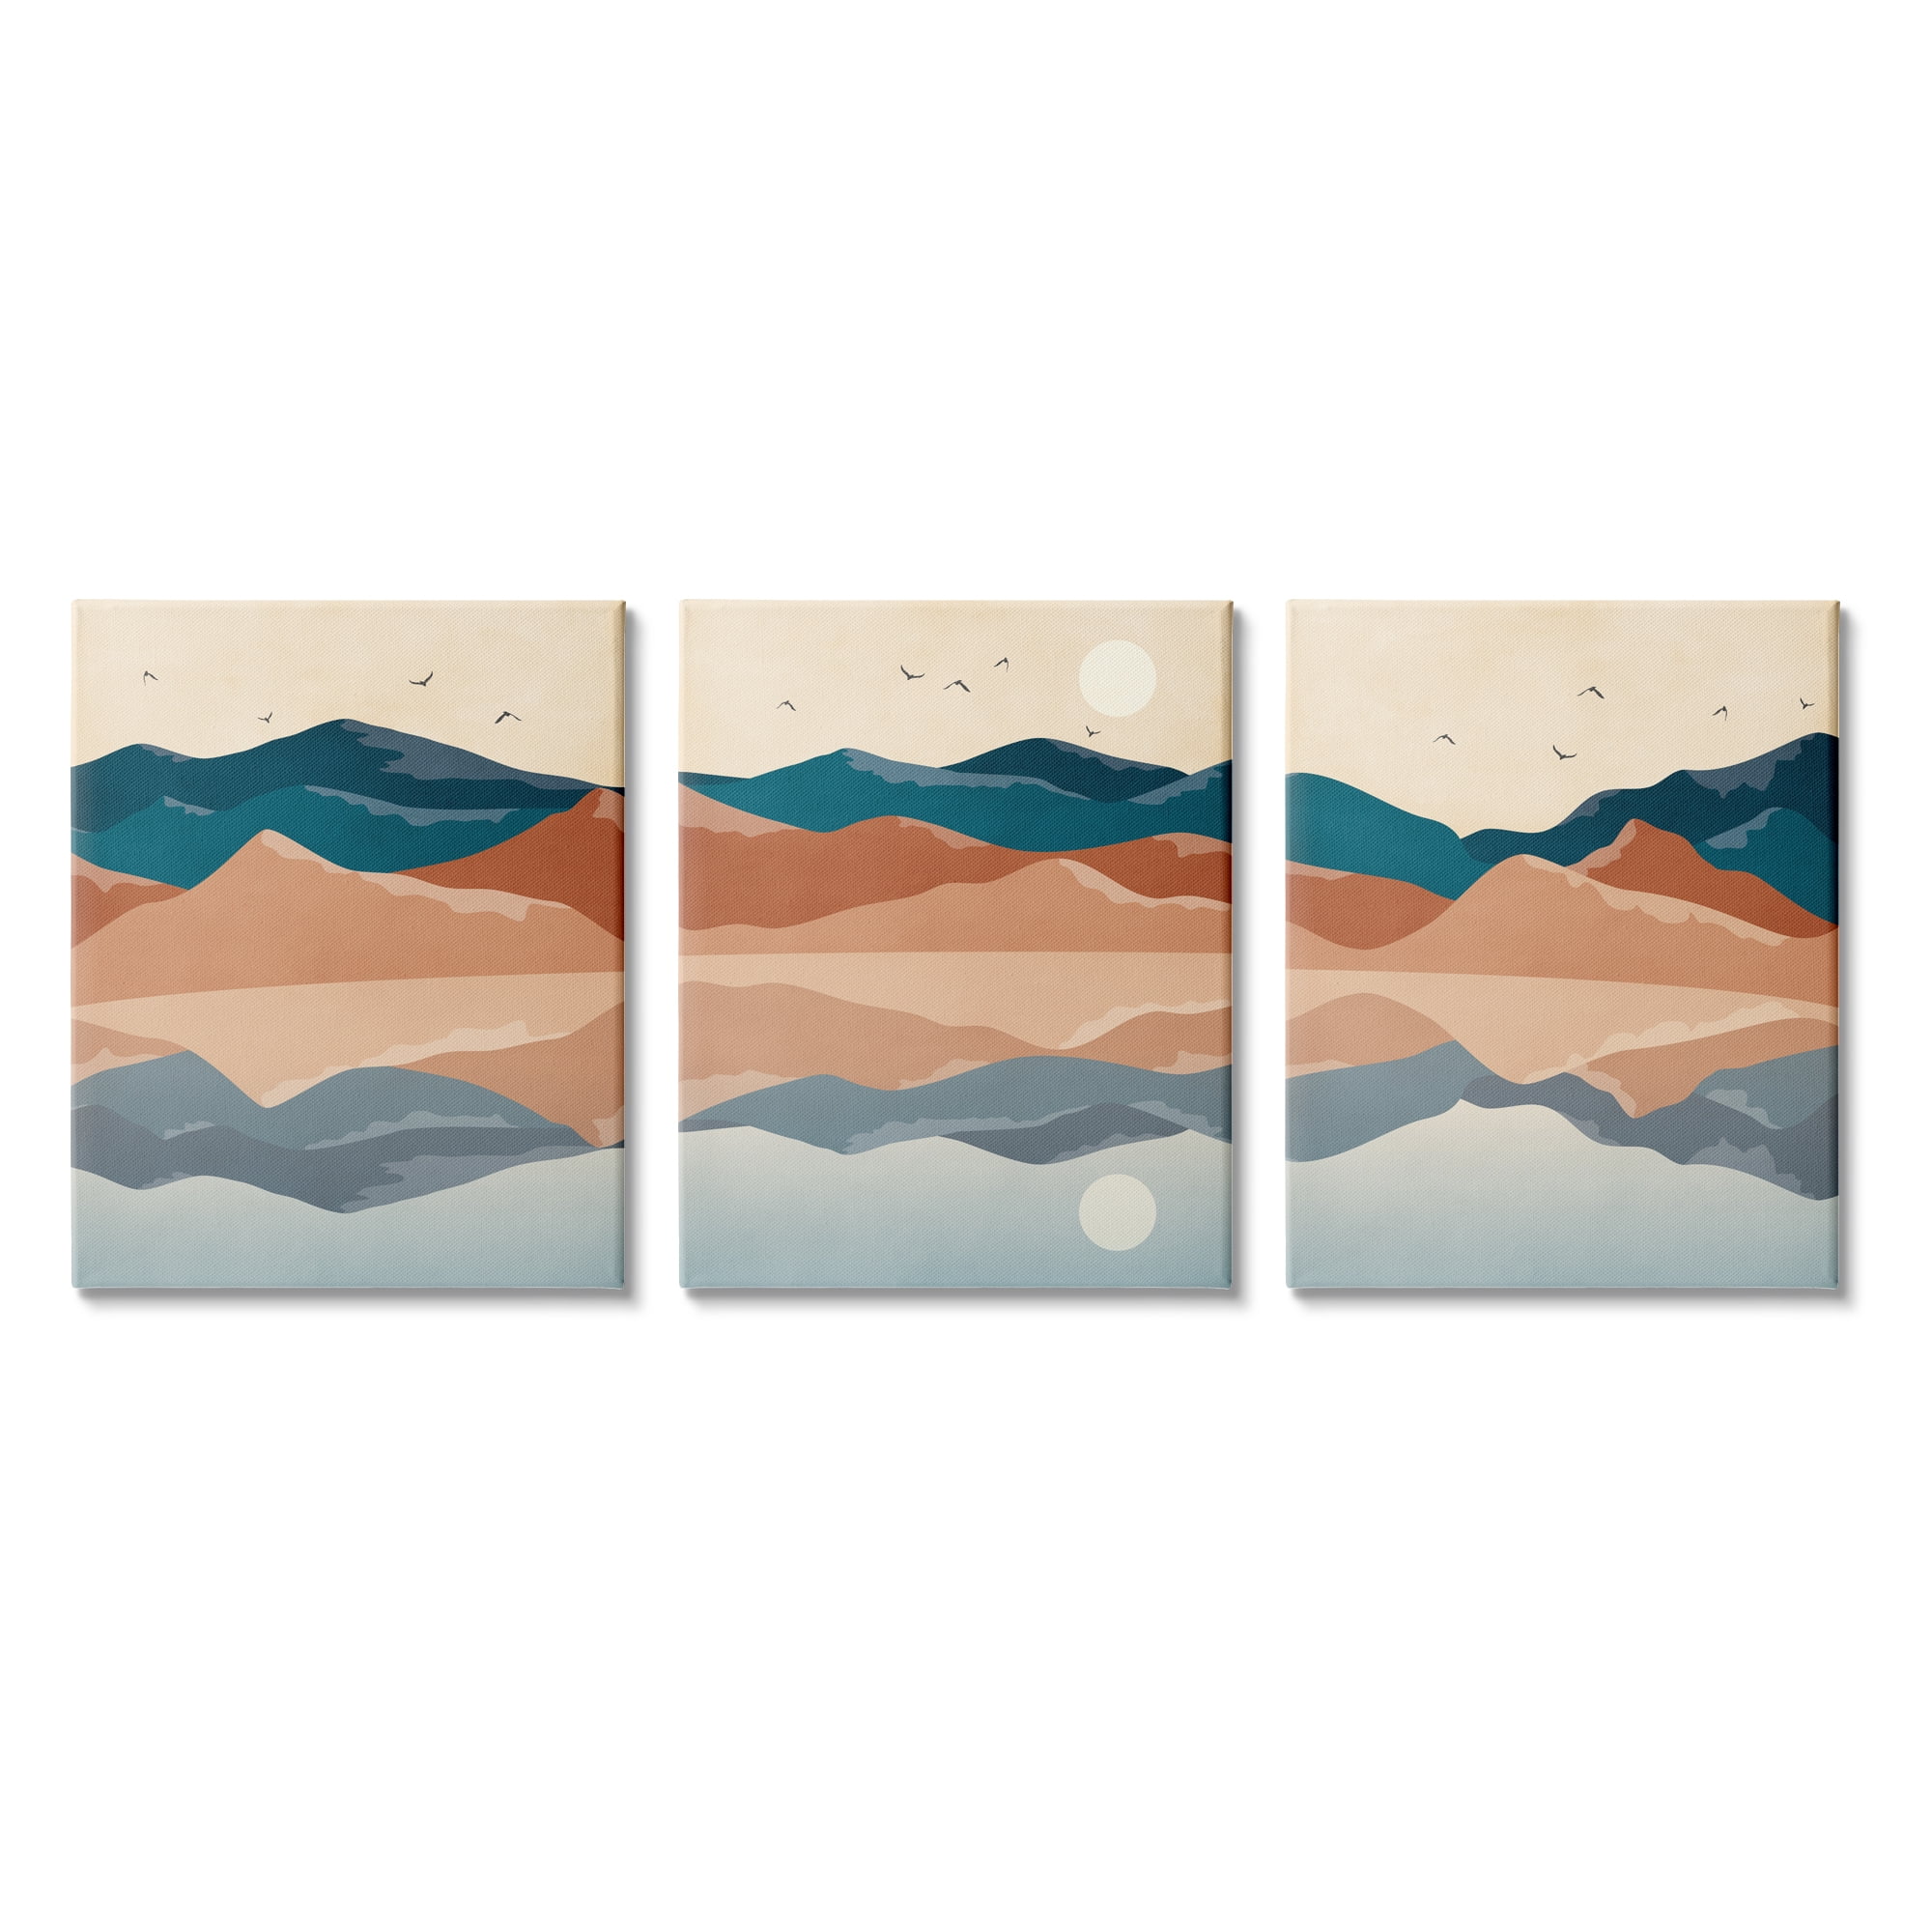 Stupell Industries Modern Landscape Reflection Flying Birds Over Lake  Graphic Art Gallery Wrapped Canvas Print Wall Art, Set of 3, Design by JJ  Design House LLC